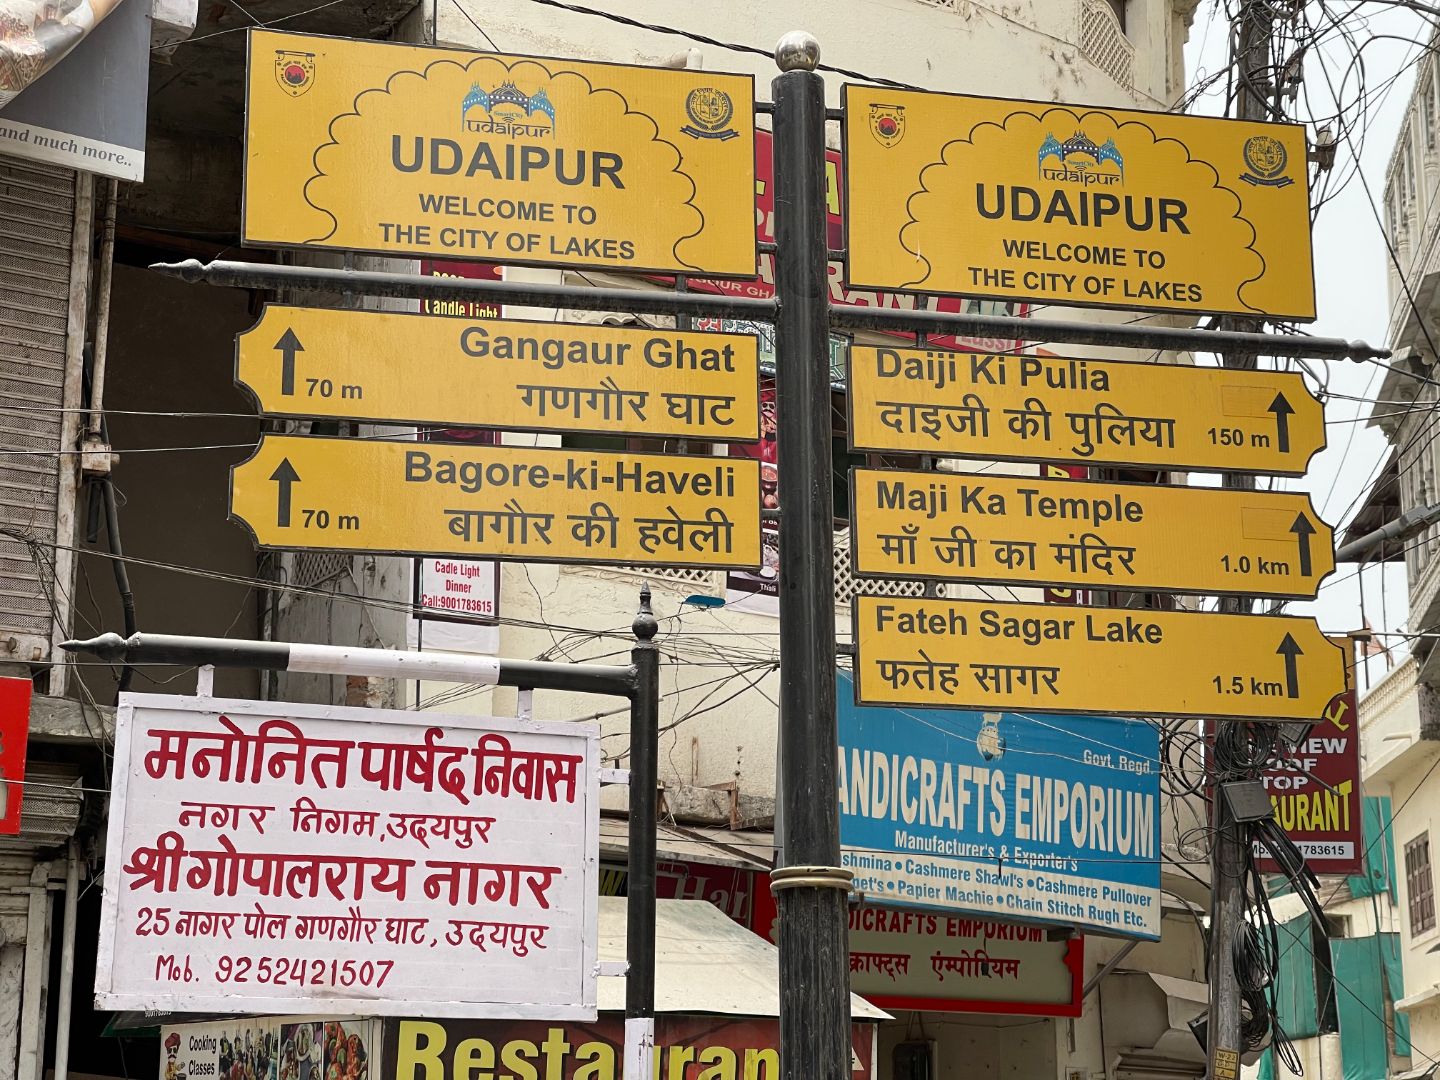 Our Journey Towards Udaipur